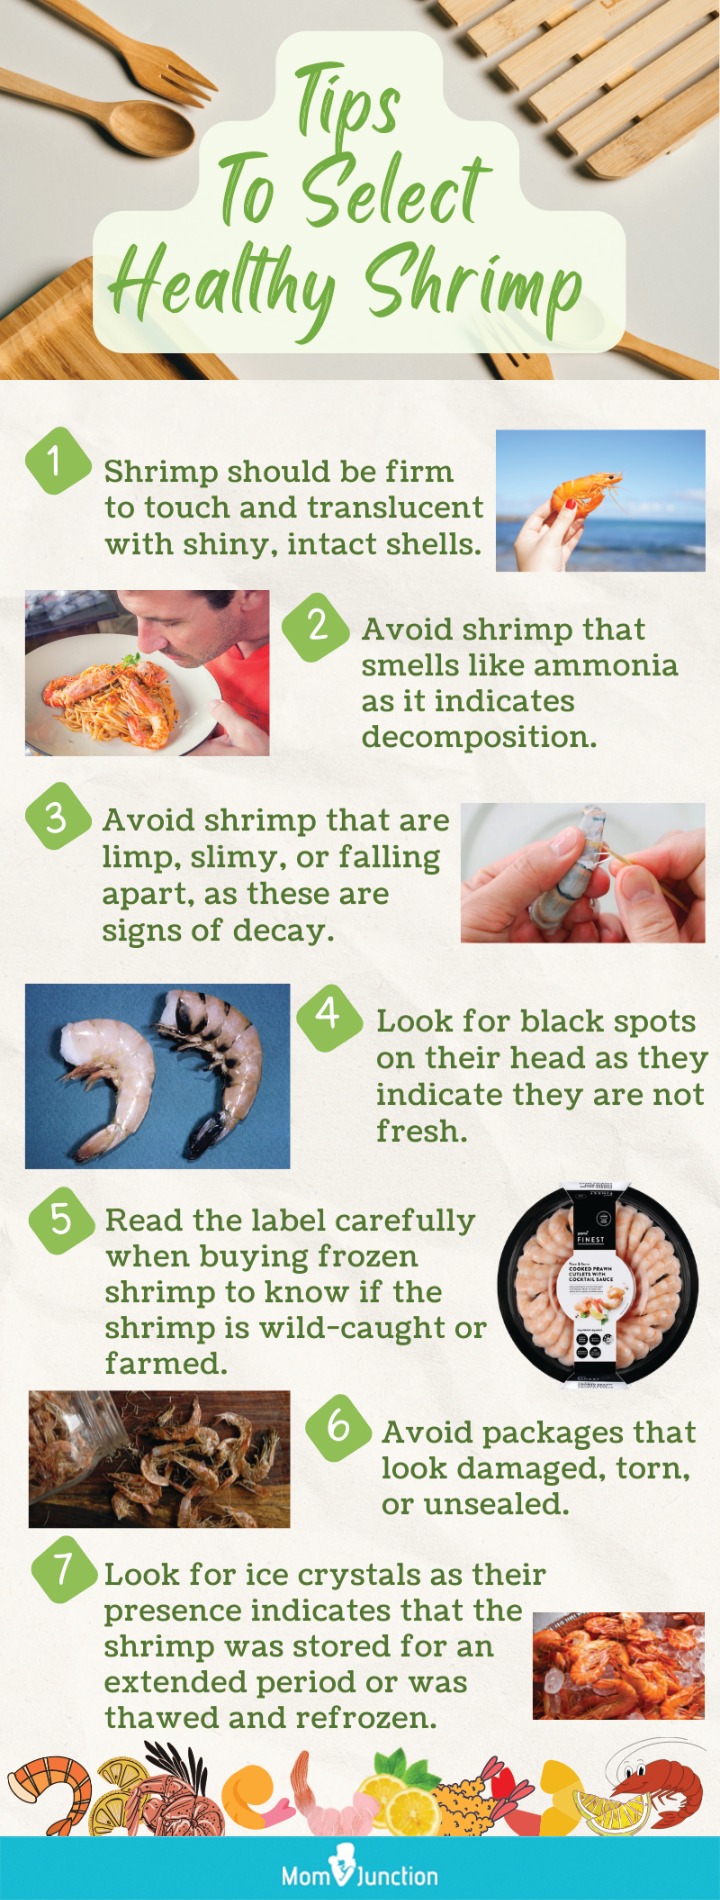 tips to select healthy shrimps (infographic)